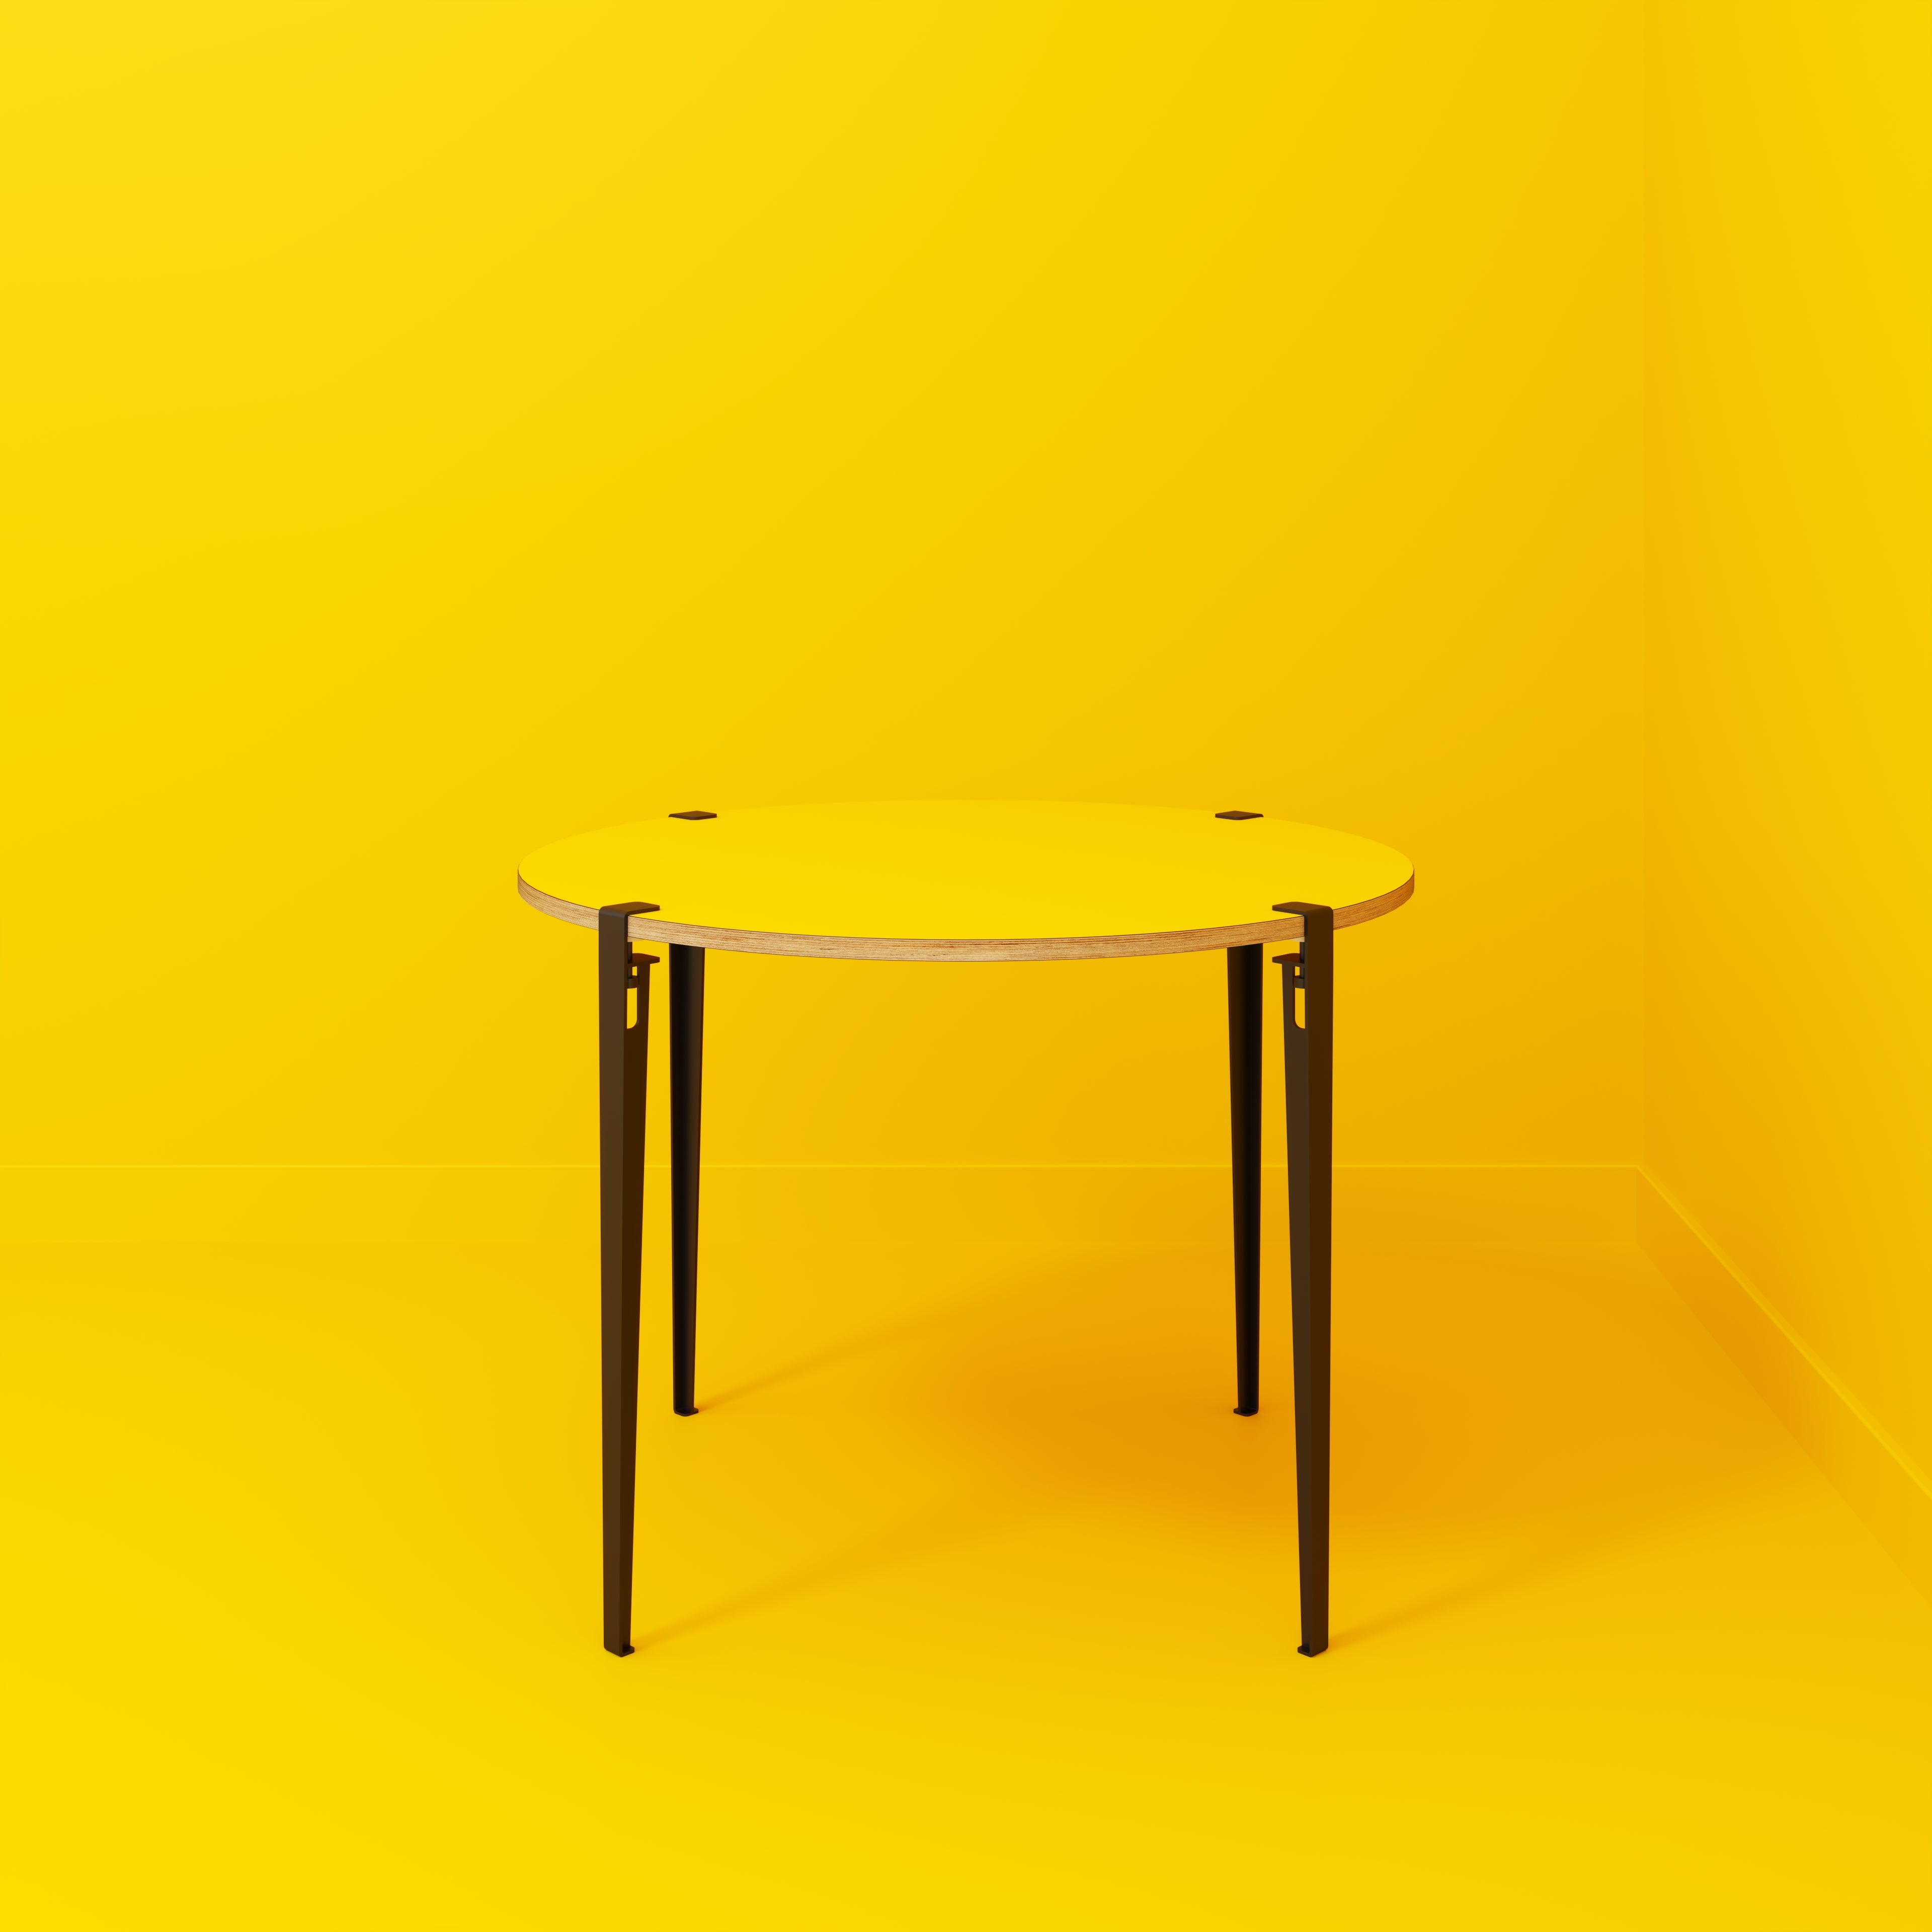 Round Table with Black Tiptoe Legs - Formica Chrome Yellow - 1200(dia) x 900(h)